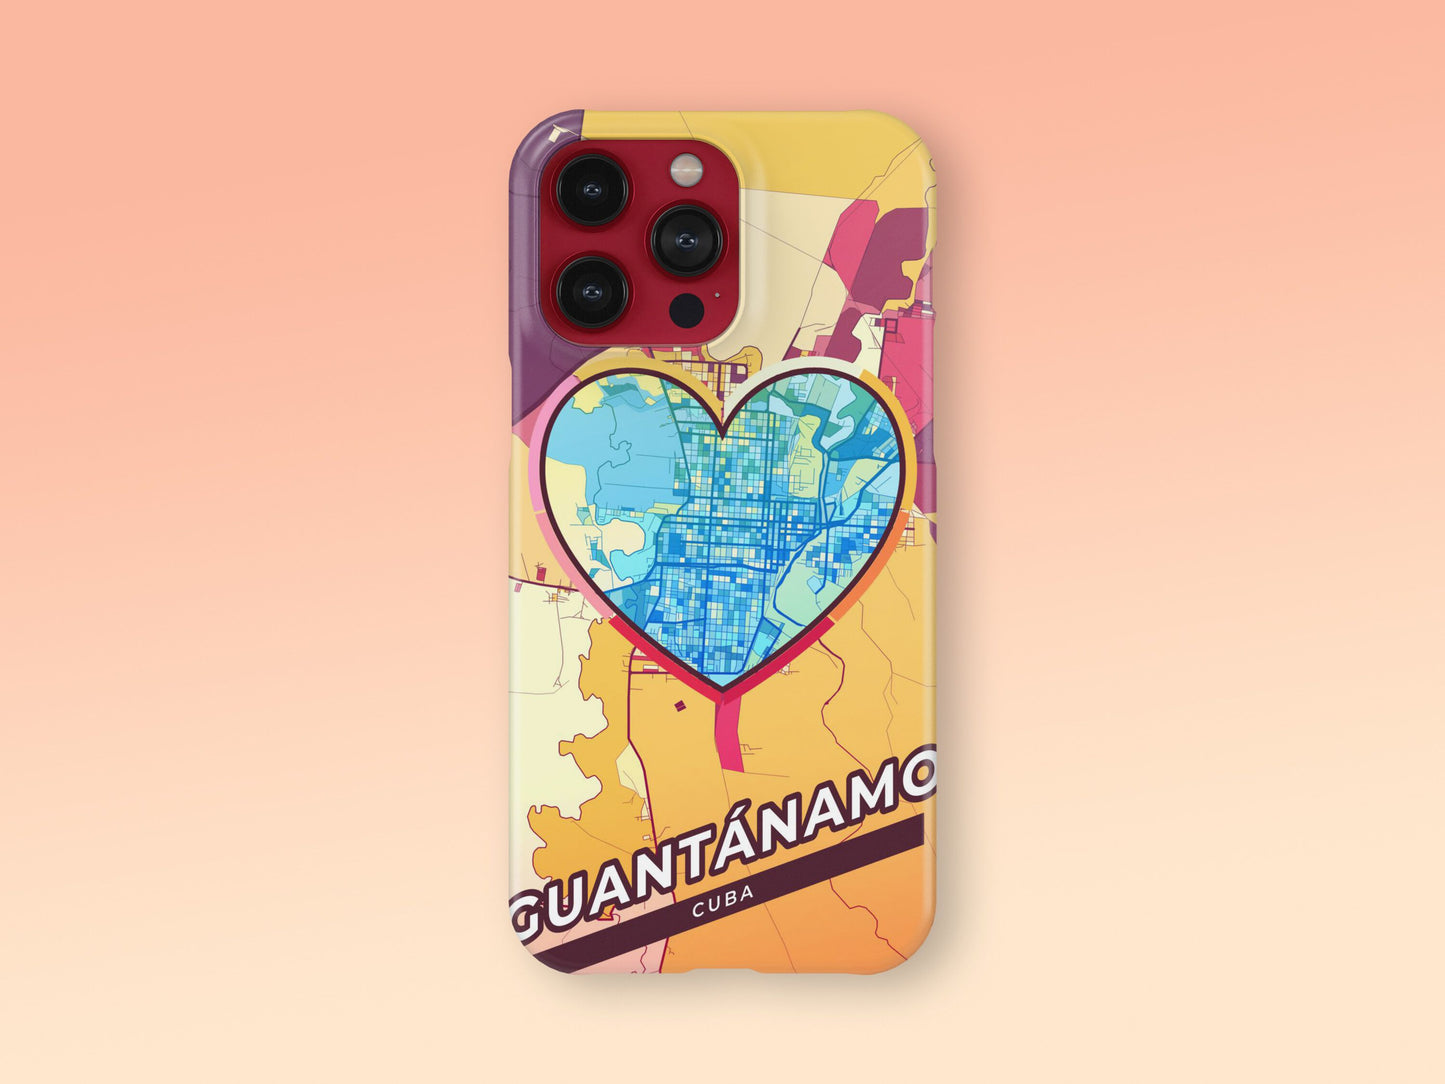 Guantánamo Cuba slim phone case with colorful icon. Birthday, wedding or housewarming gift. Couple match cases. 2